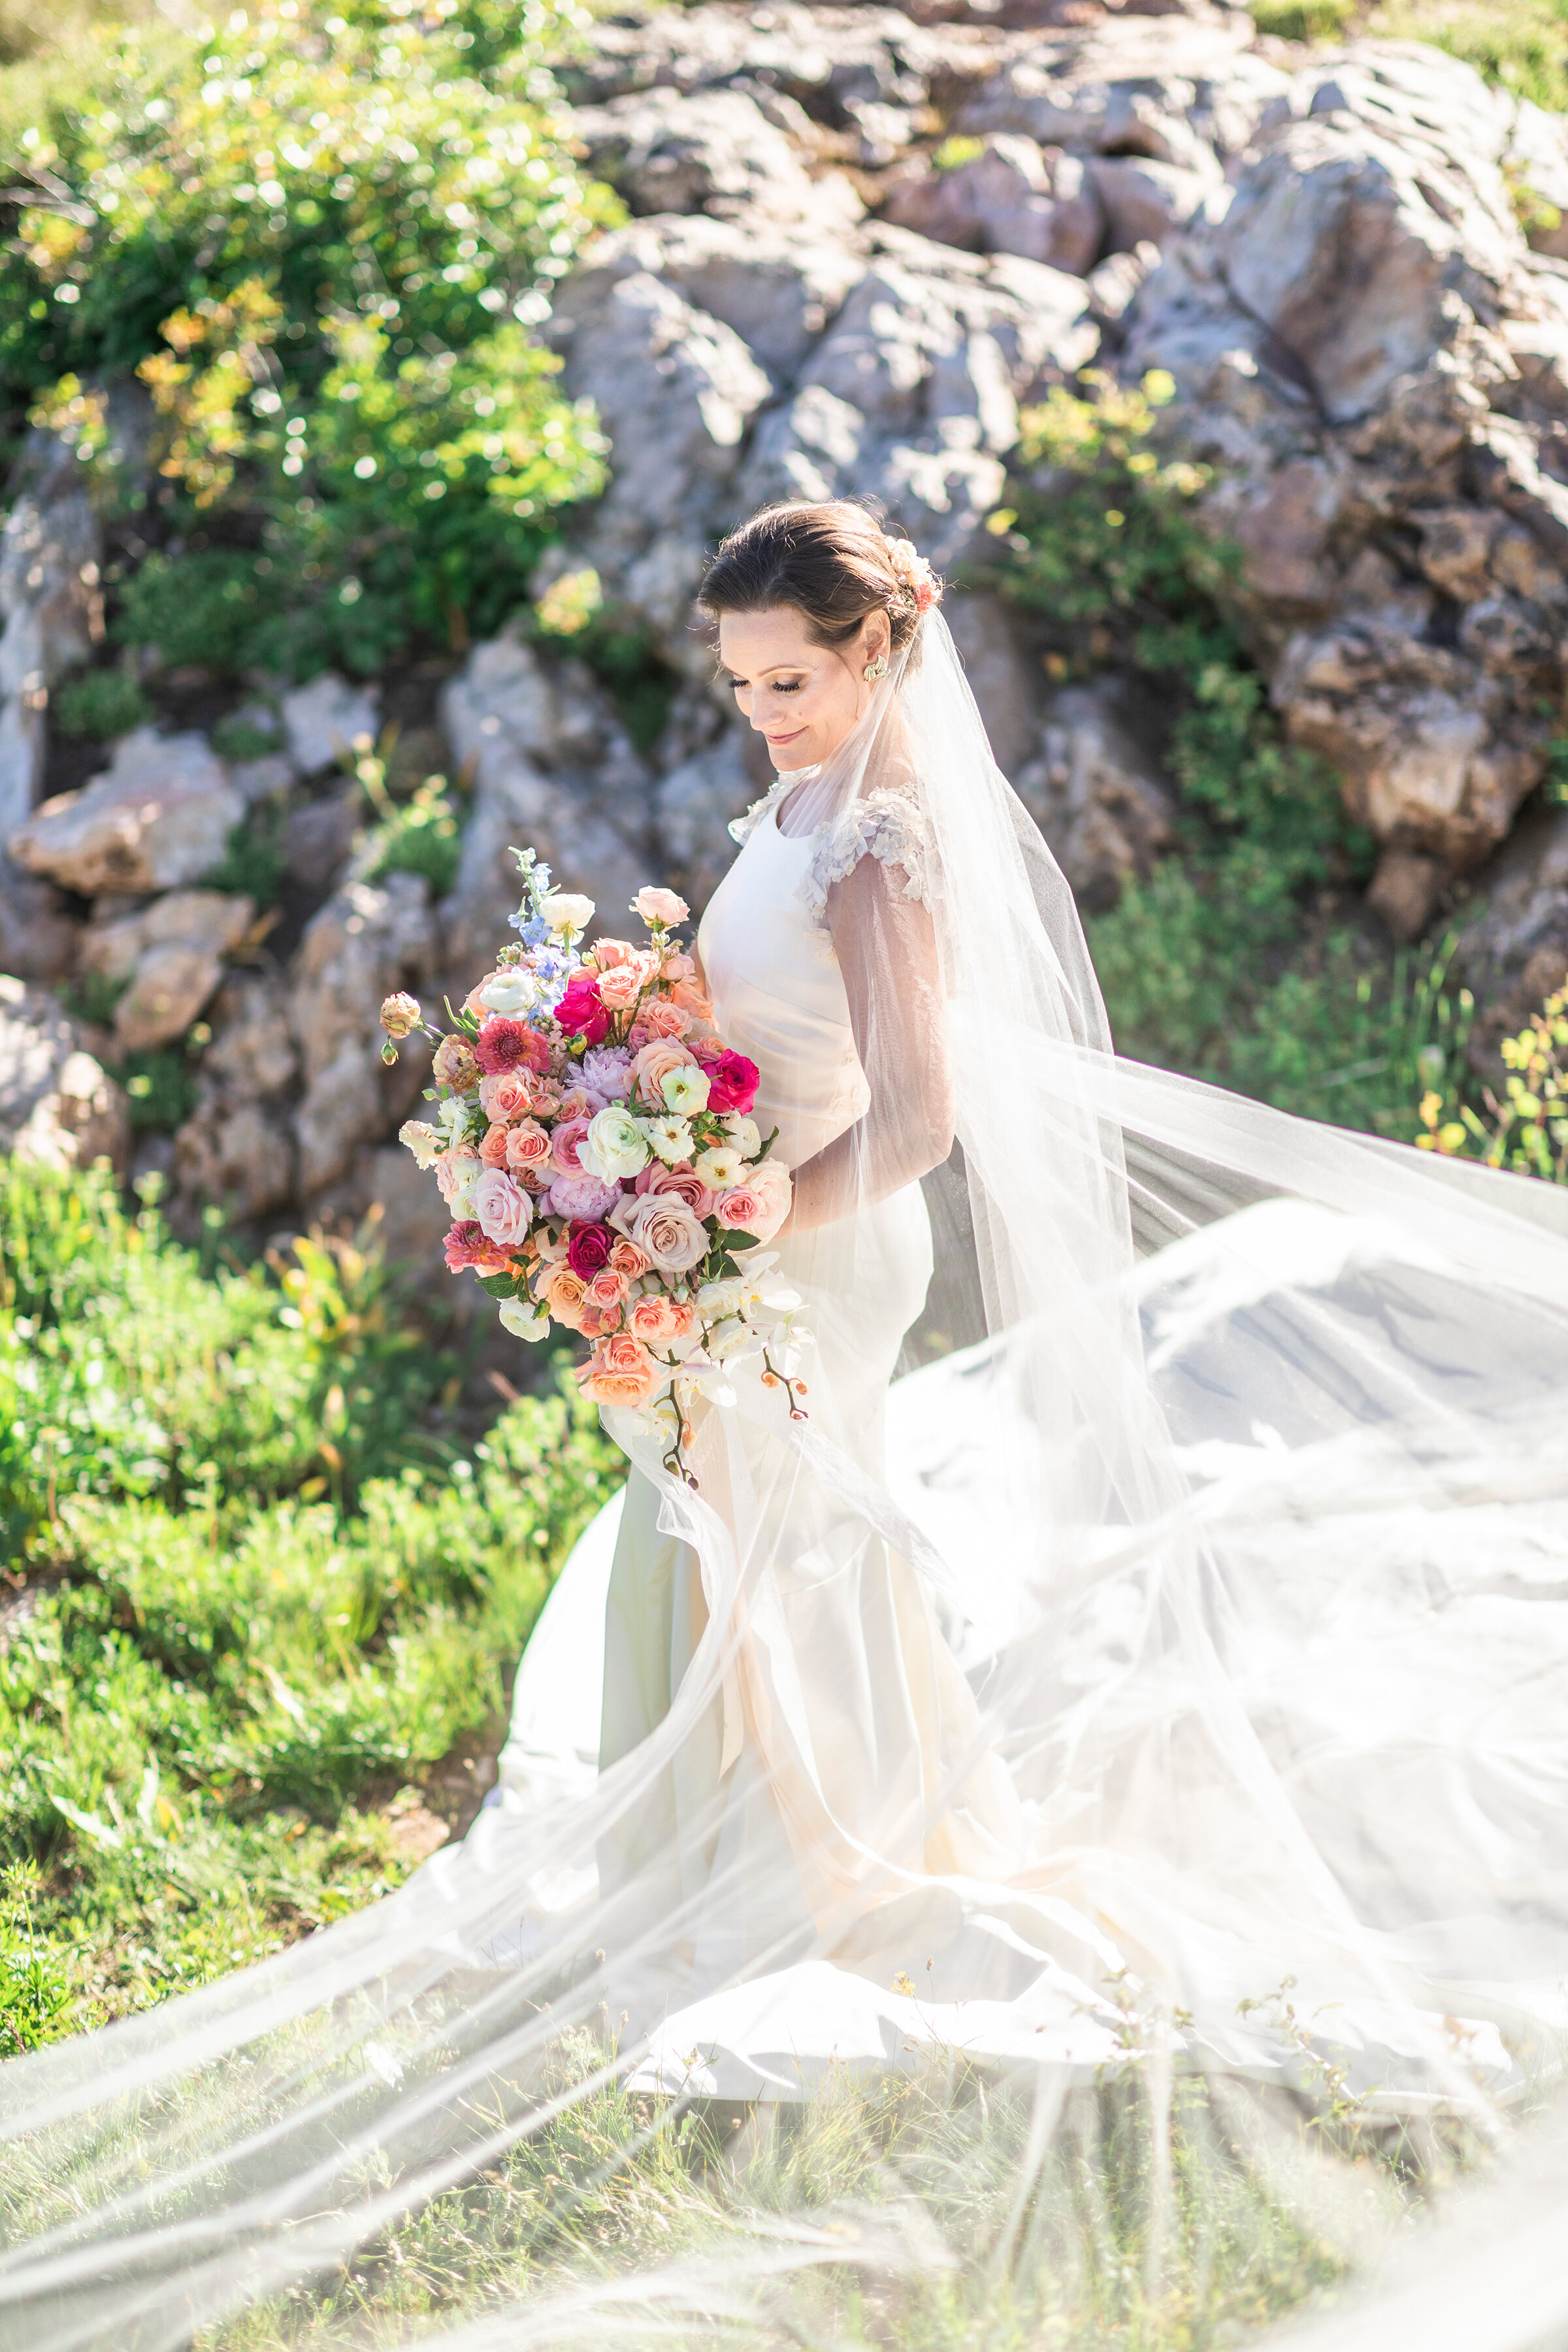  utah mountain bridal portraits featuring natural and genuine posing by clarity lane photography in salt lake city, utah. walking mountain bridal background outdoor wedding pastel bridal bouquet long flowy bridal veil holding wedding bouquet brown ha